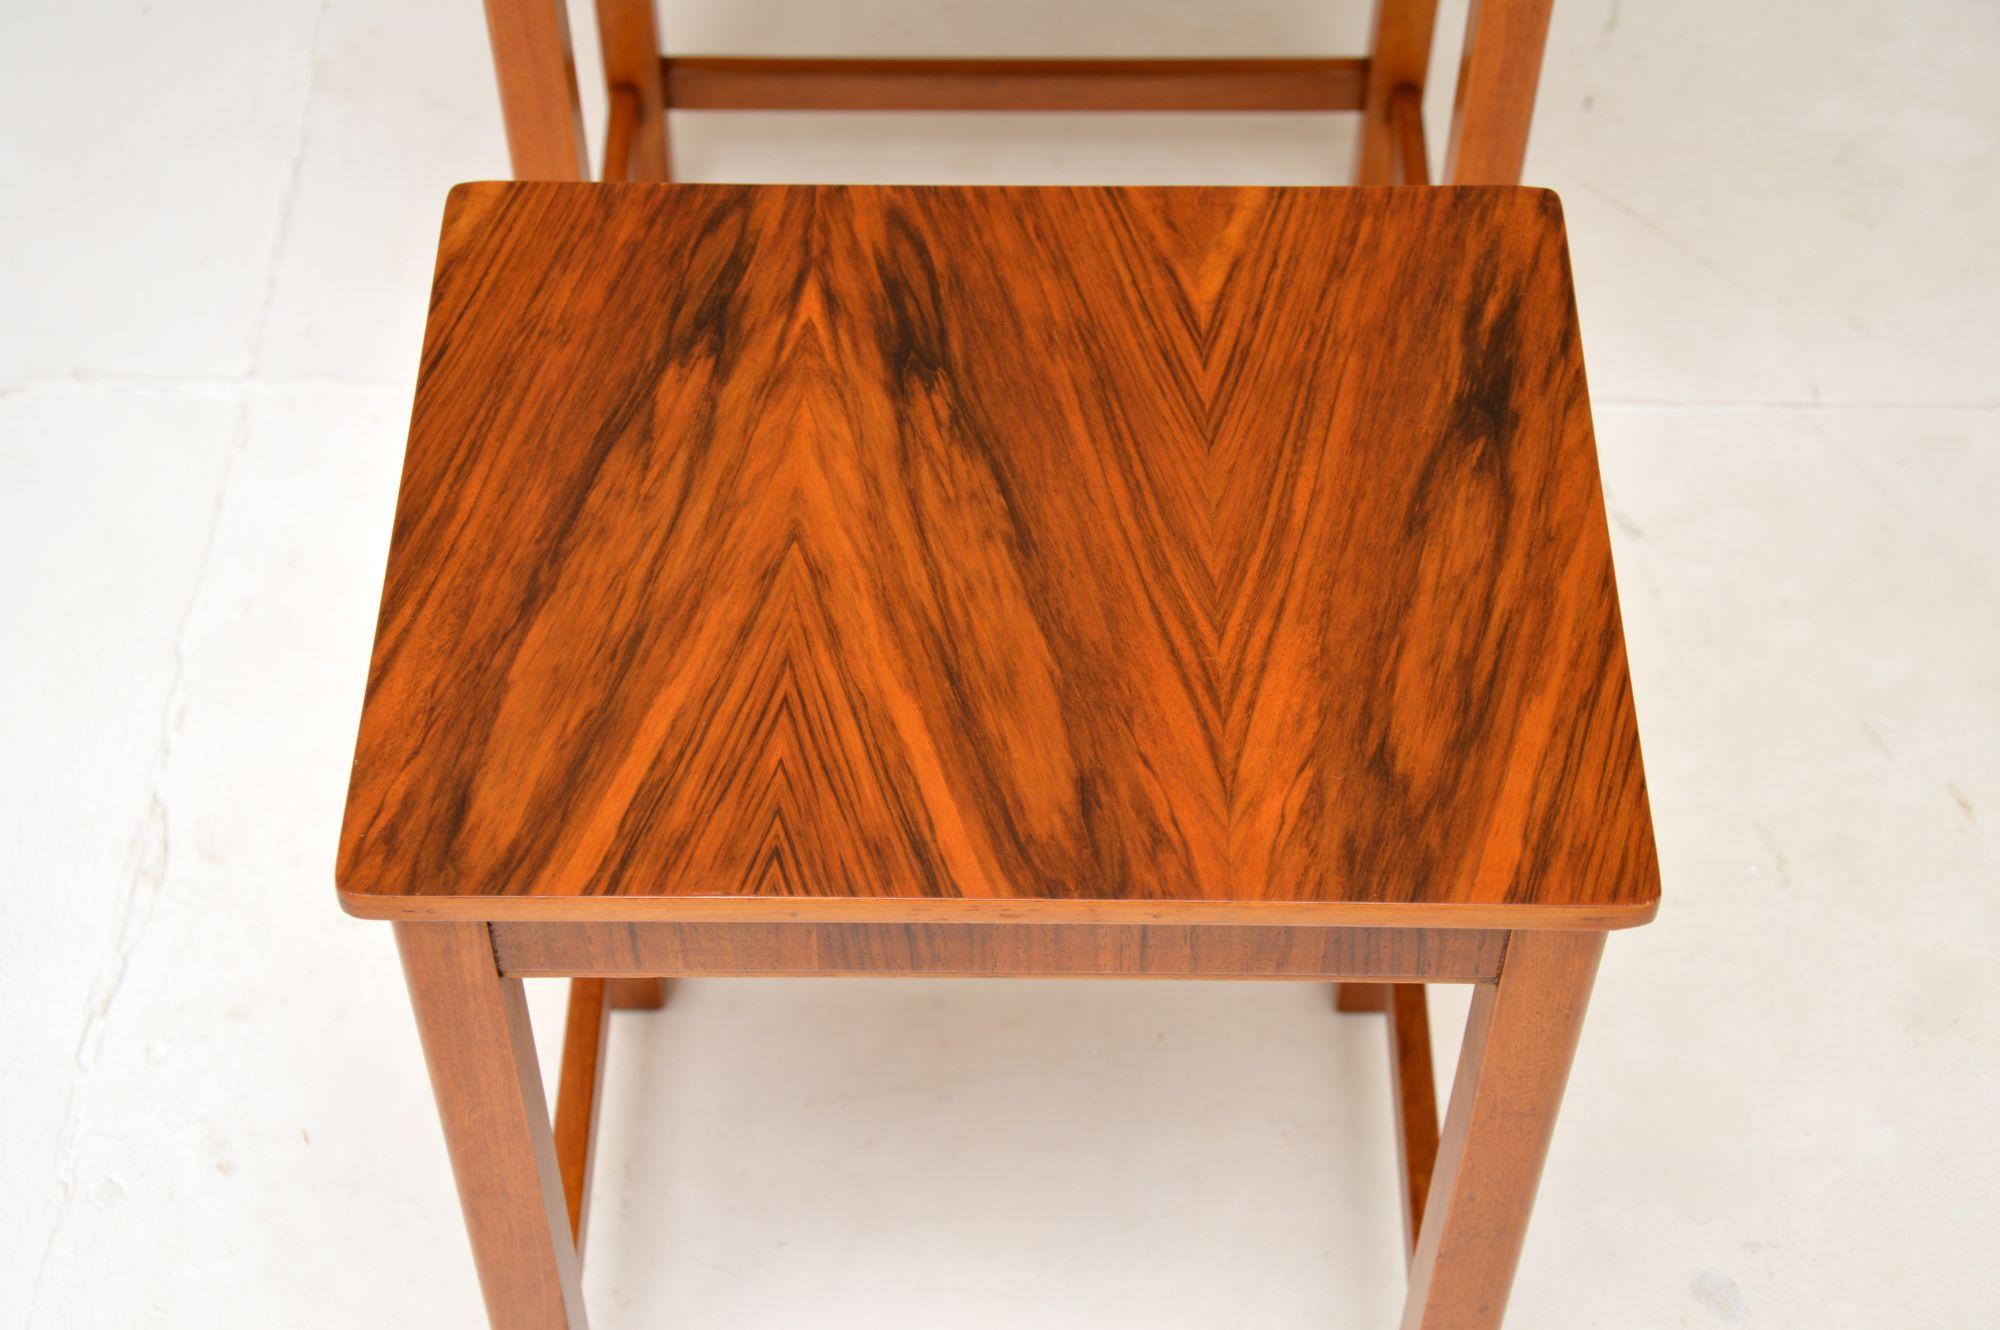 1920's Art Deco Figured Walnut Nest of Tables For Sale 5